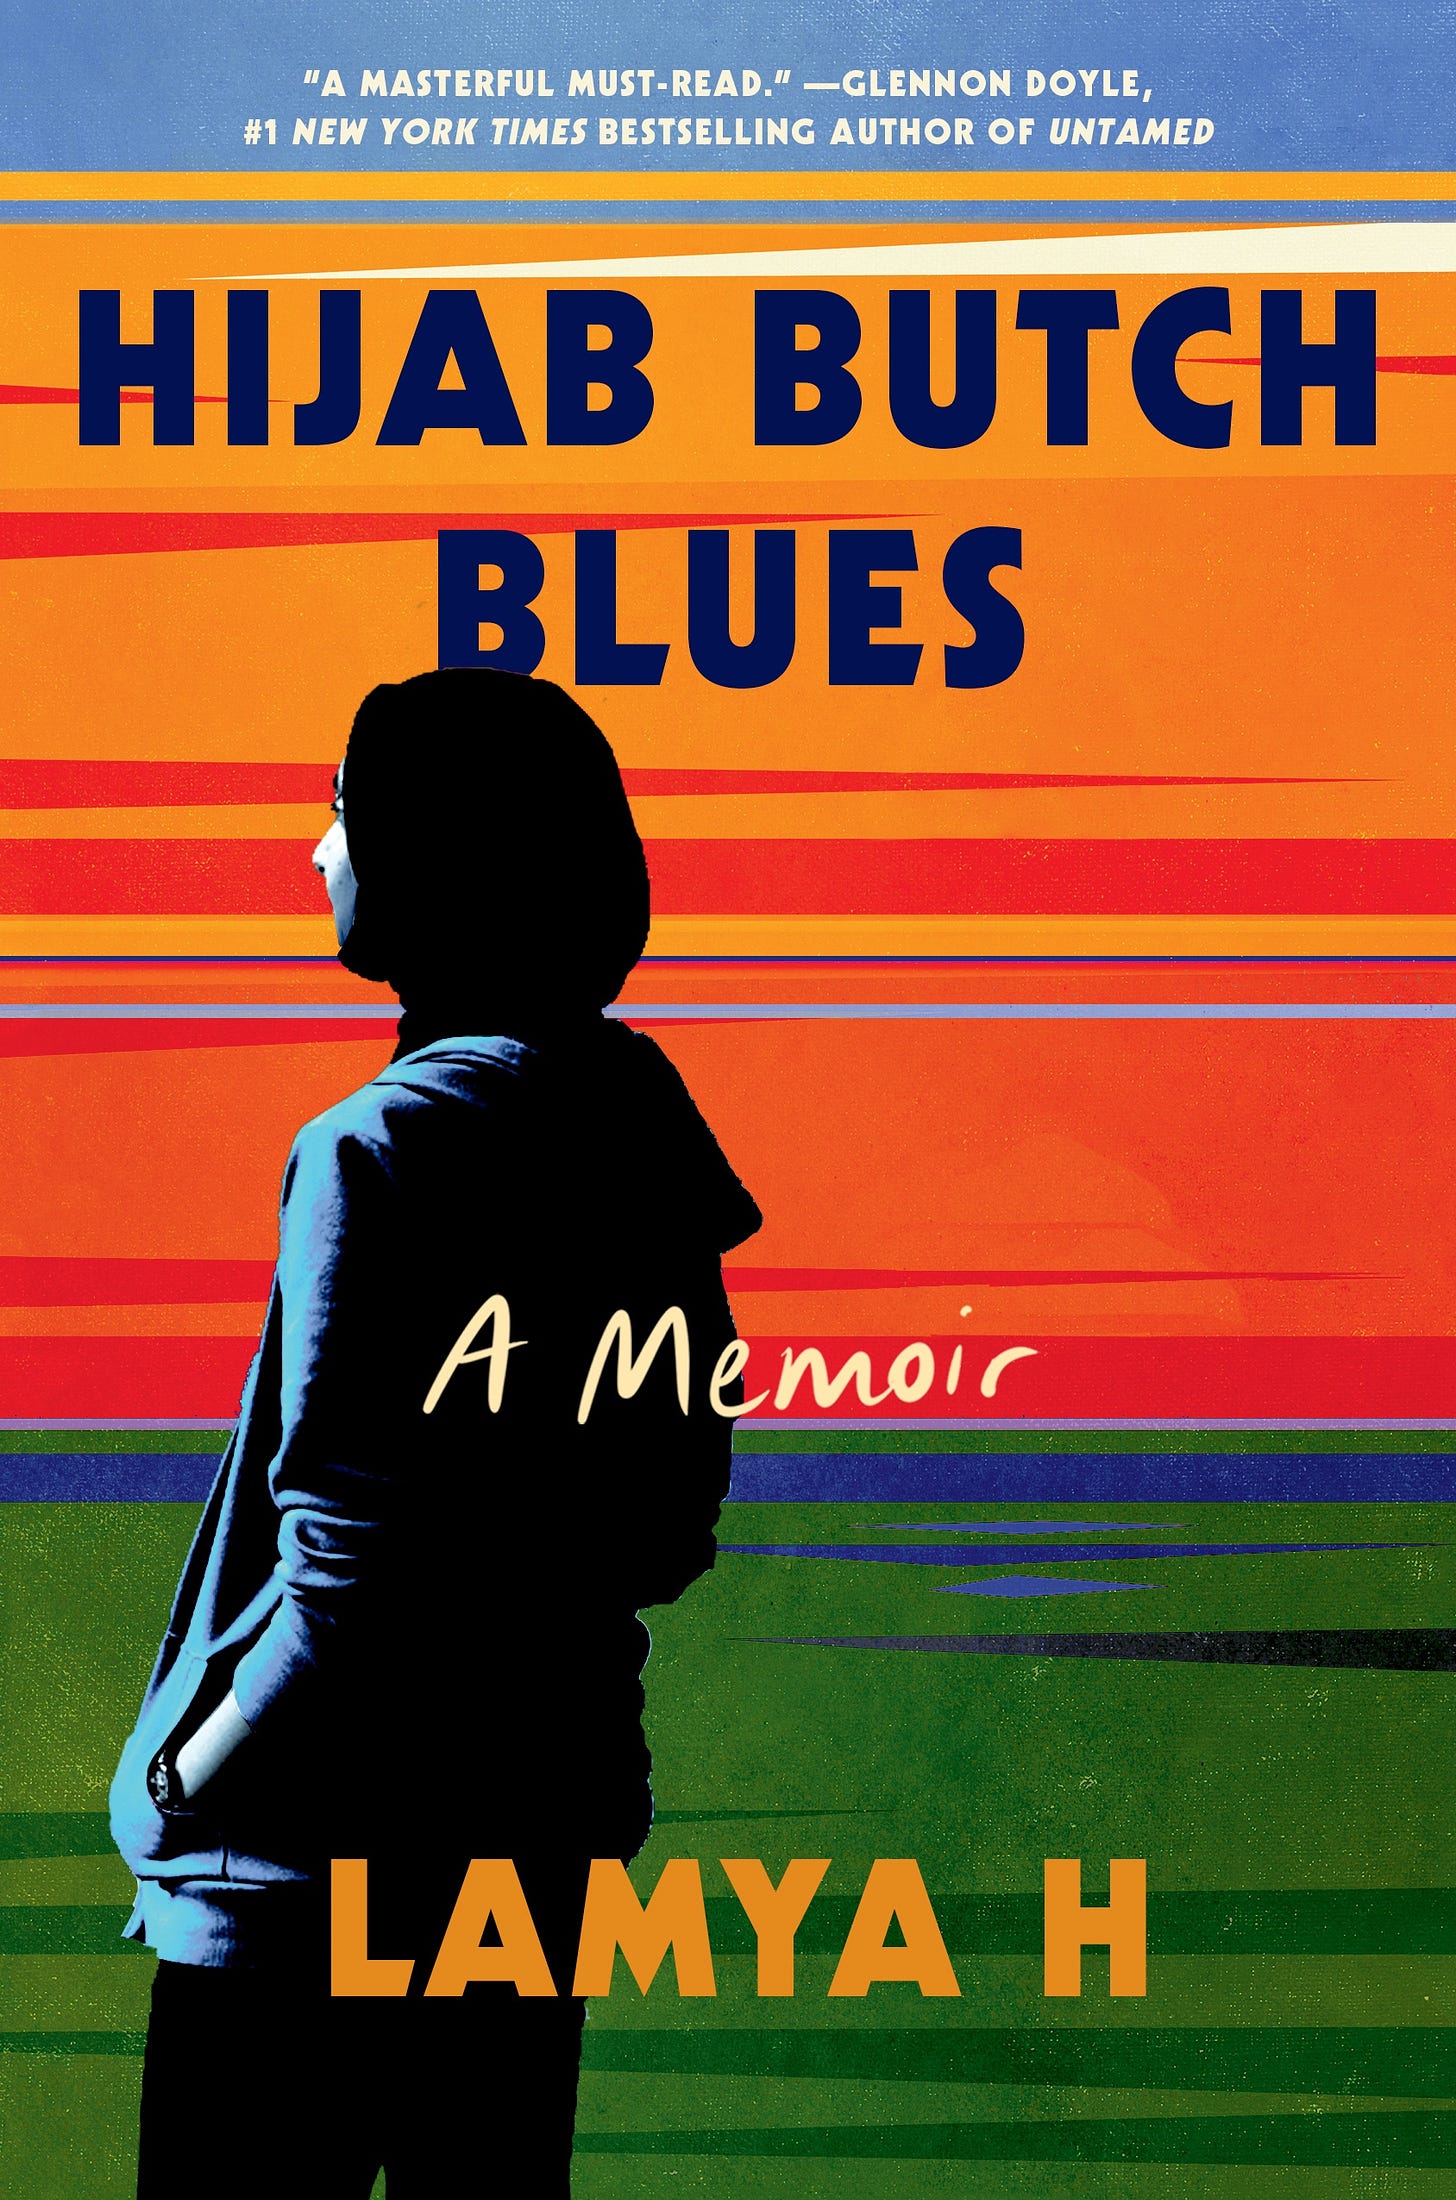 The cover of Hijab Butch Blues by Lamya H. There is a blurb from Glennon Doyle, the book's title in large blue block letters and the image of a woman wearing hijab, looking away from the reader, set against swaths of color--light blue, orange, red, and green.